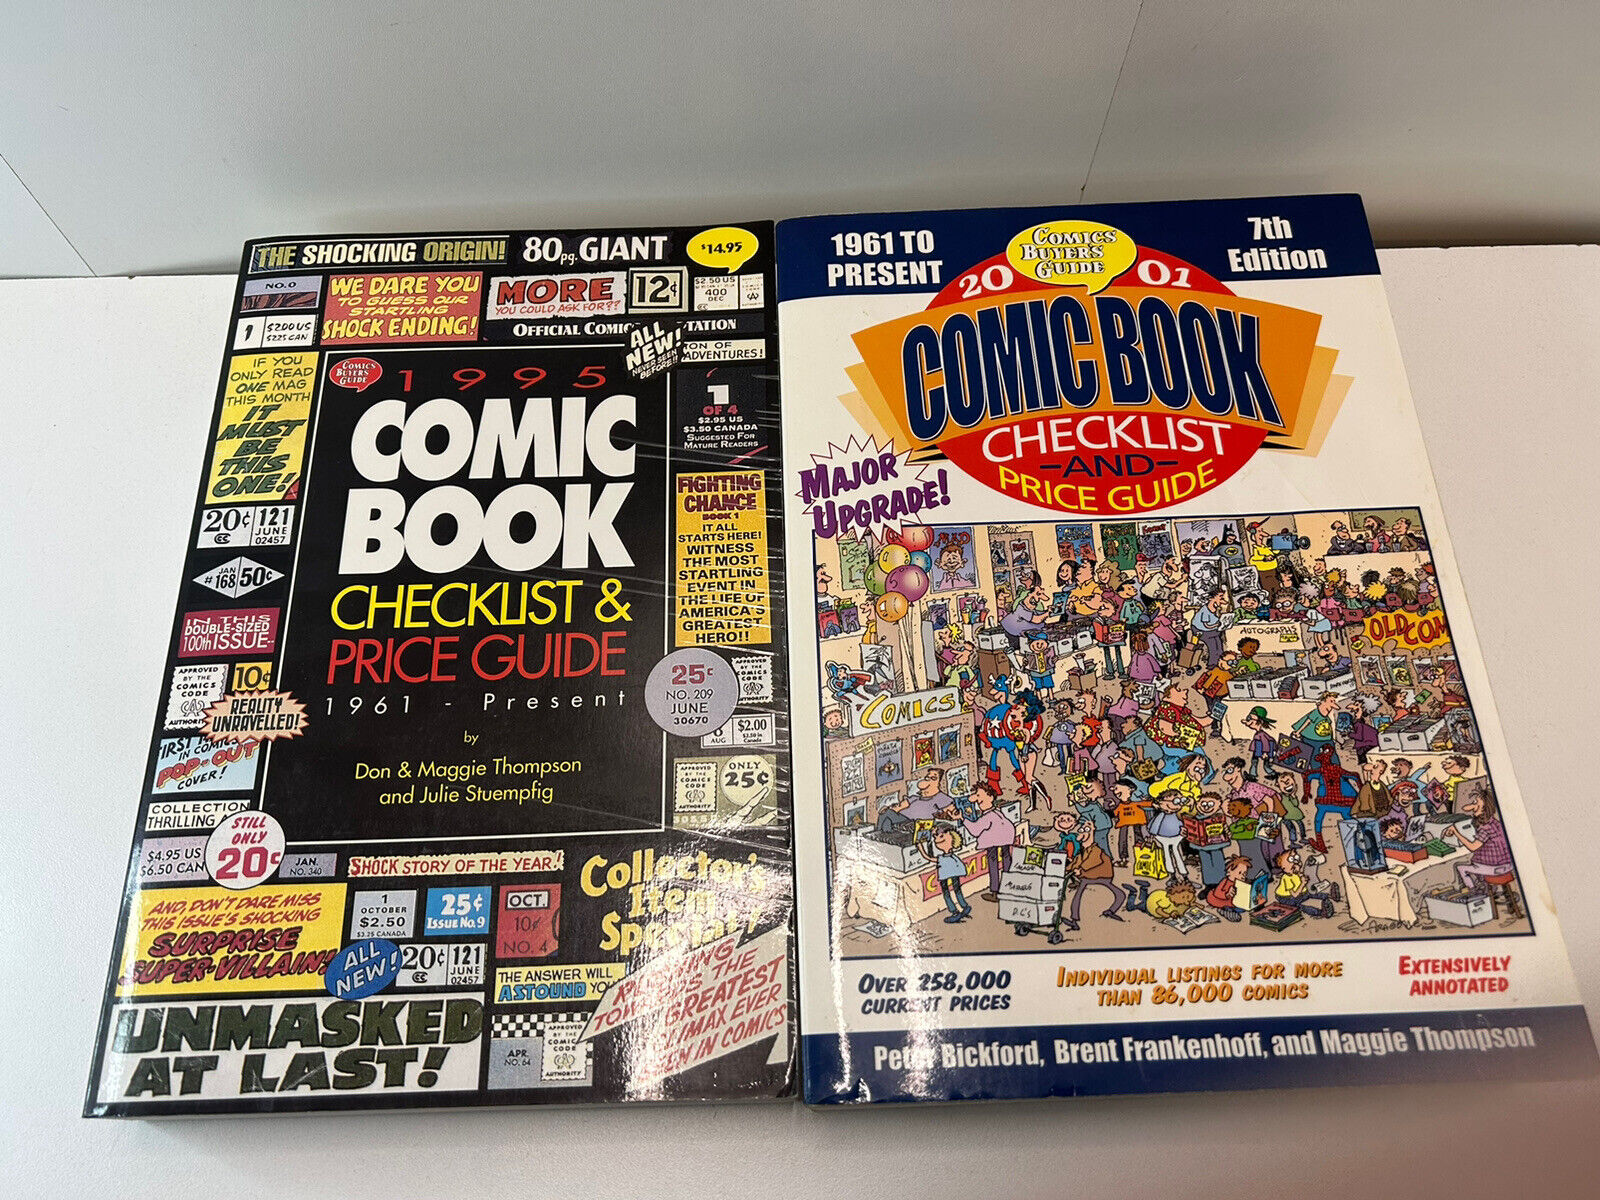 Comics Buyer's Guide Comic Book Checklist And Price Guide #2001 1995 Lot 2